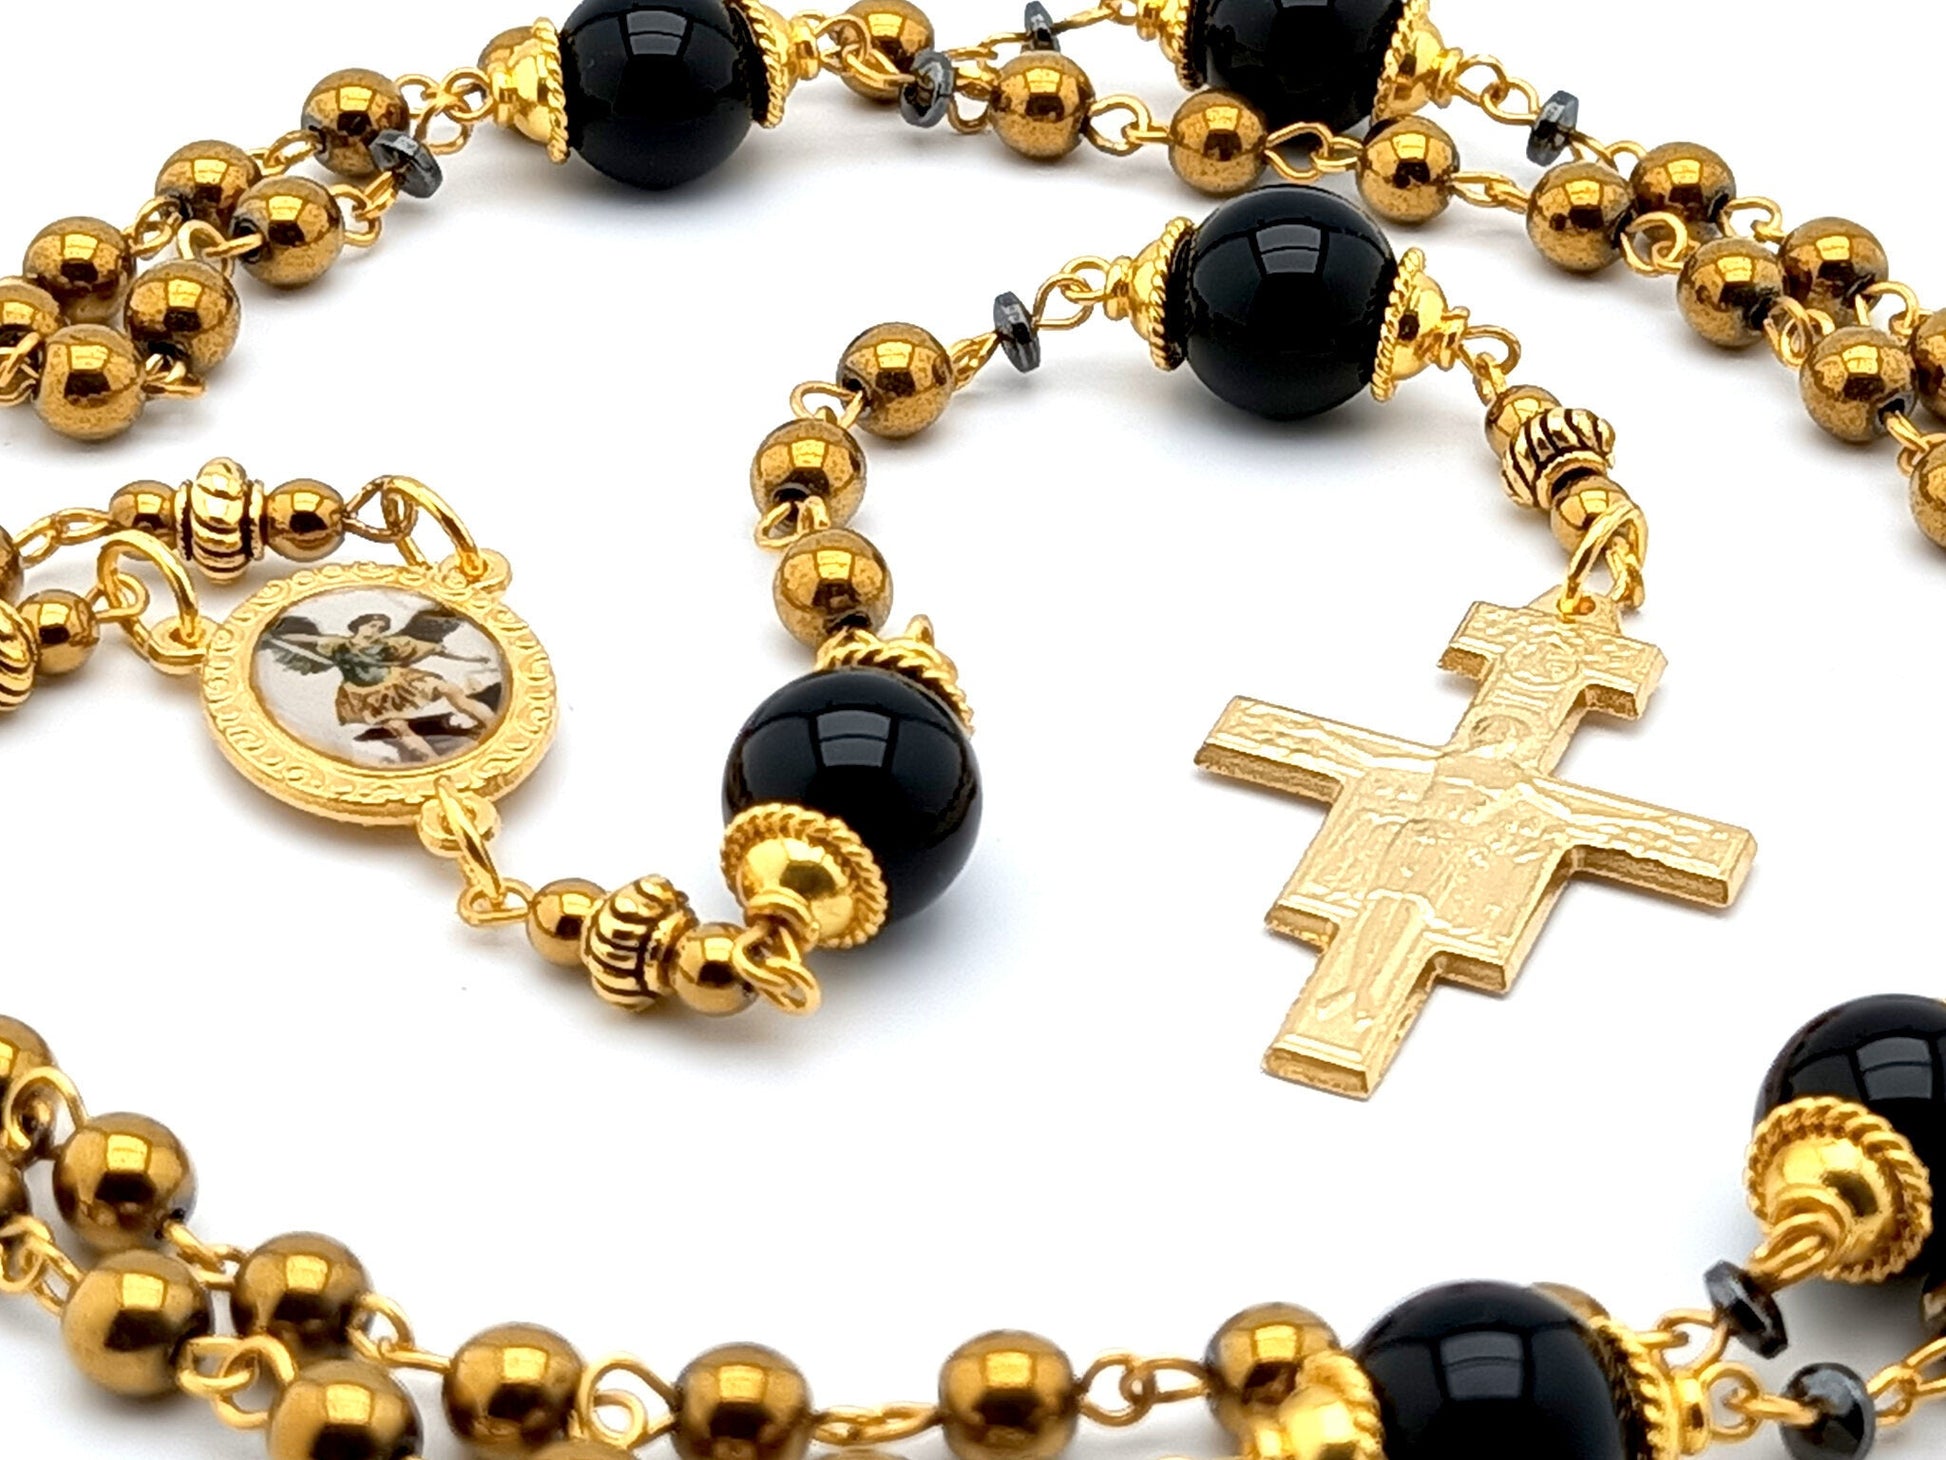 Saint Michael unique rosary beads with gold and onyx gemstone beads, golden crucifix and picture centre medal.